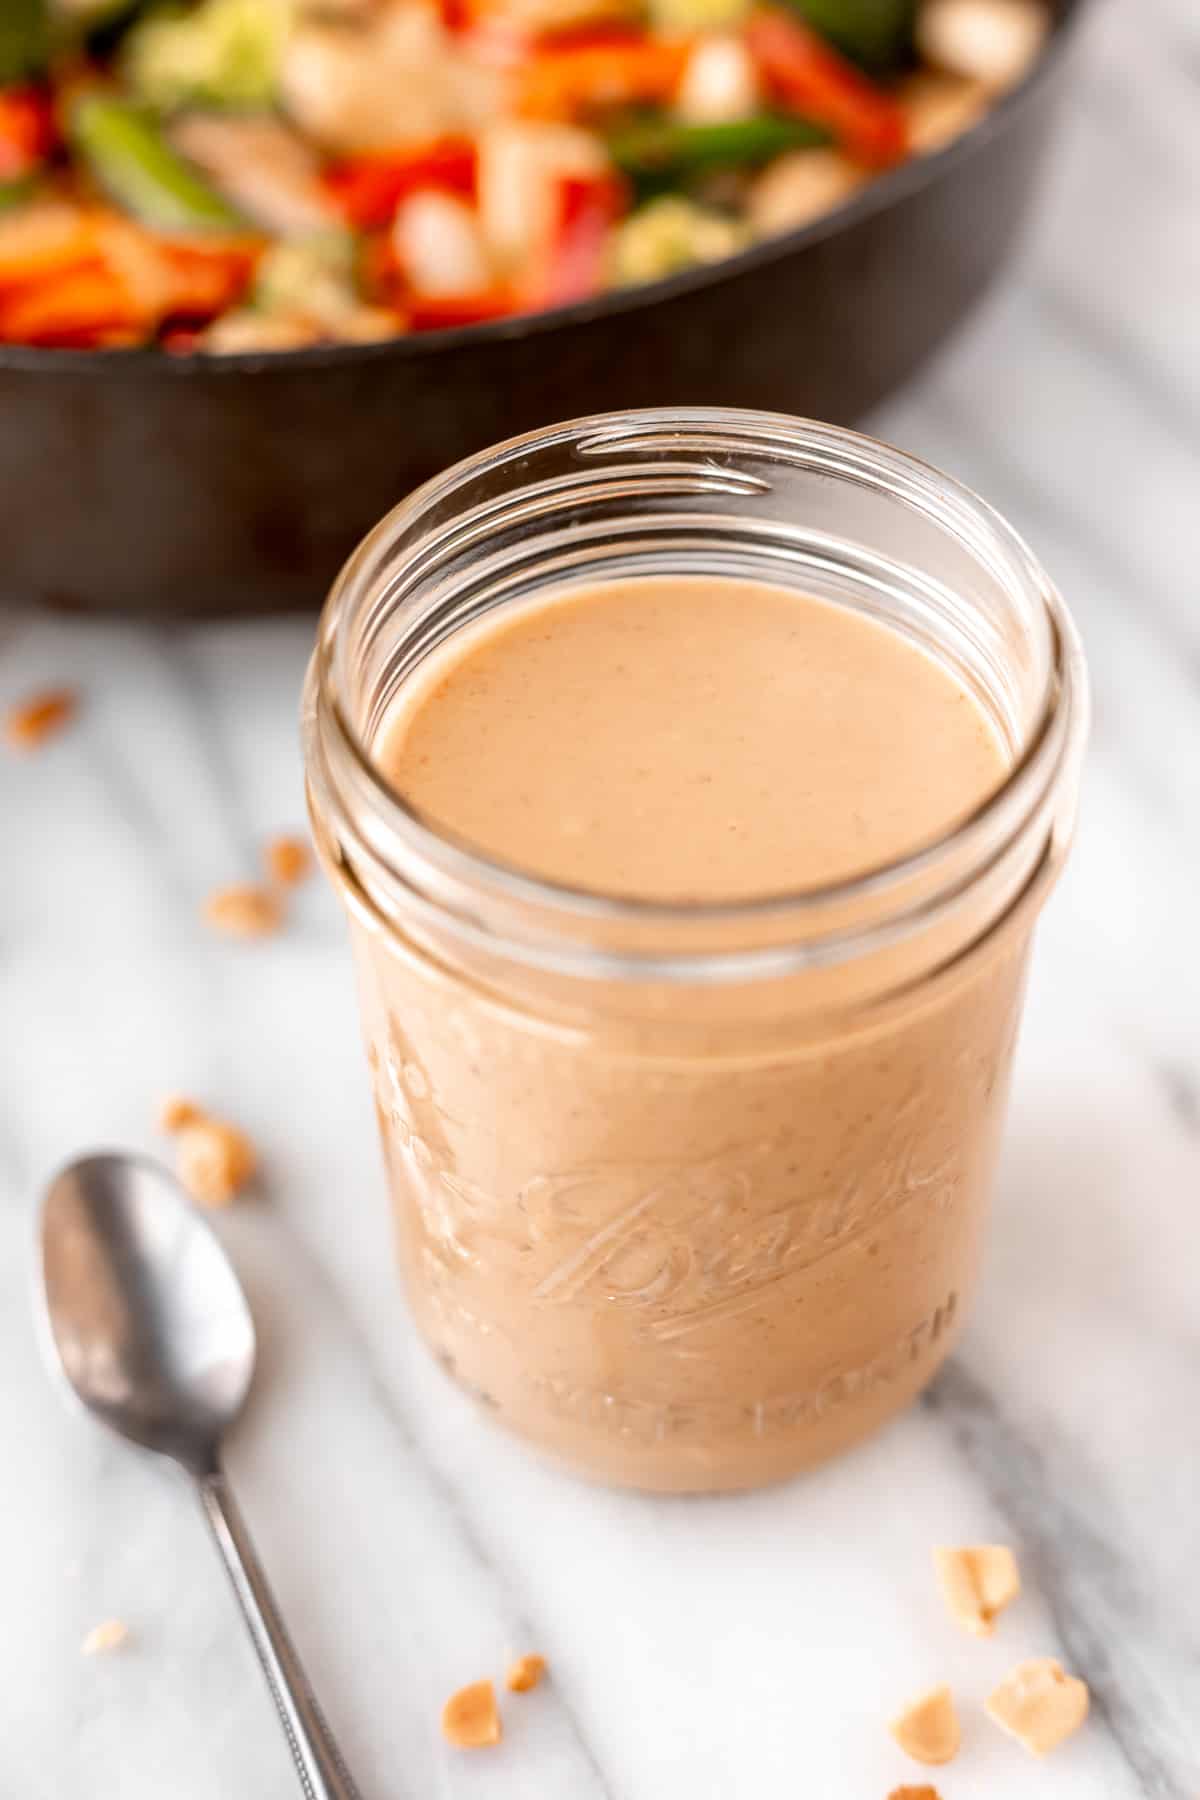 A glass jar of peanut sauce with a spoon next to it and chopped peanut around it.